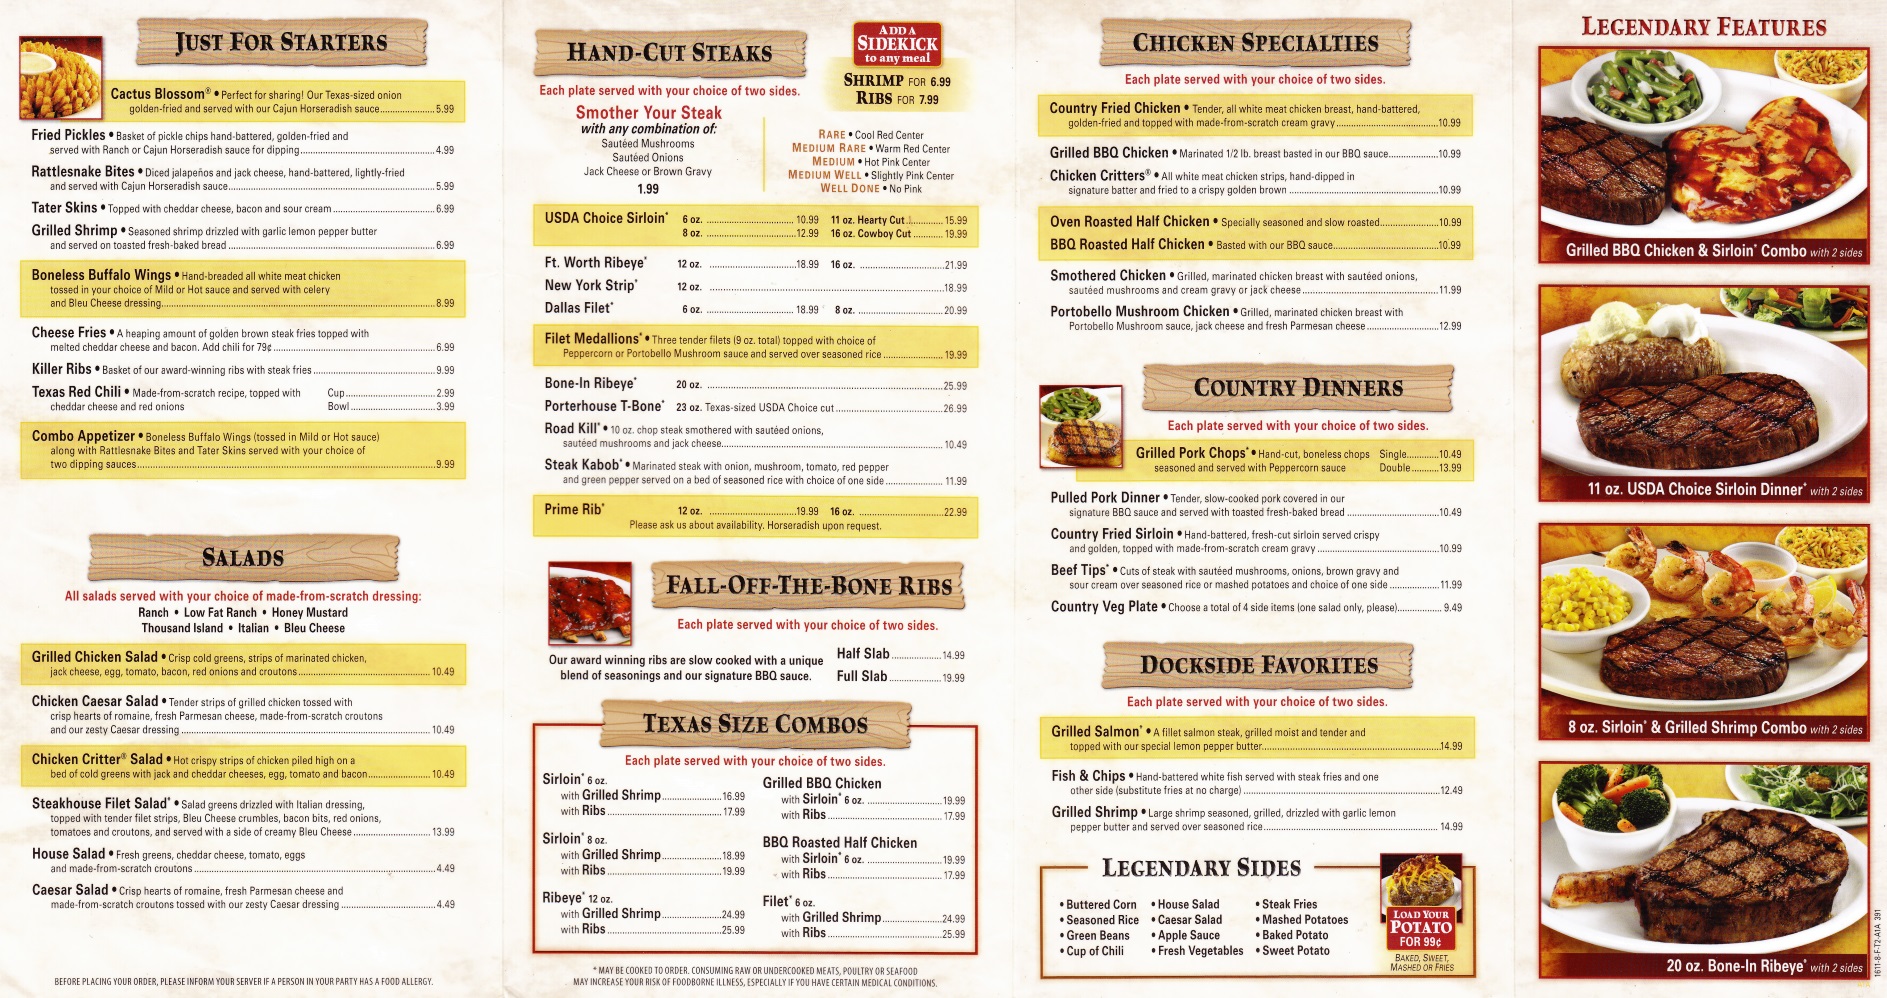 Texas Roadhouse Menu Prices 2017 Meals And Deals Induced Info.